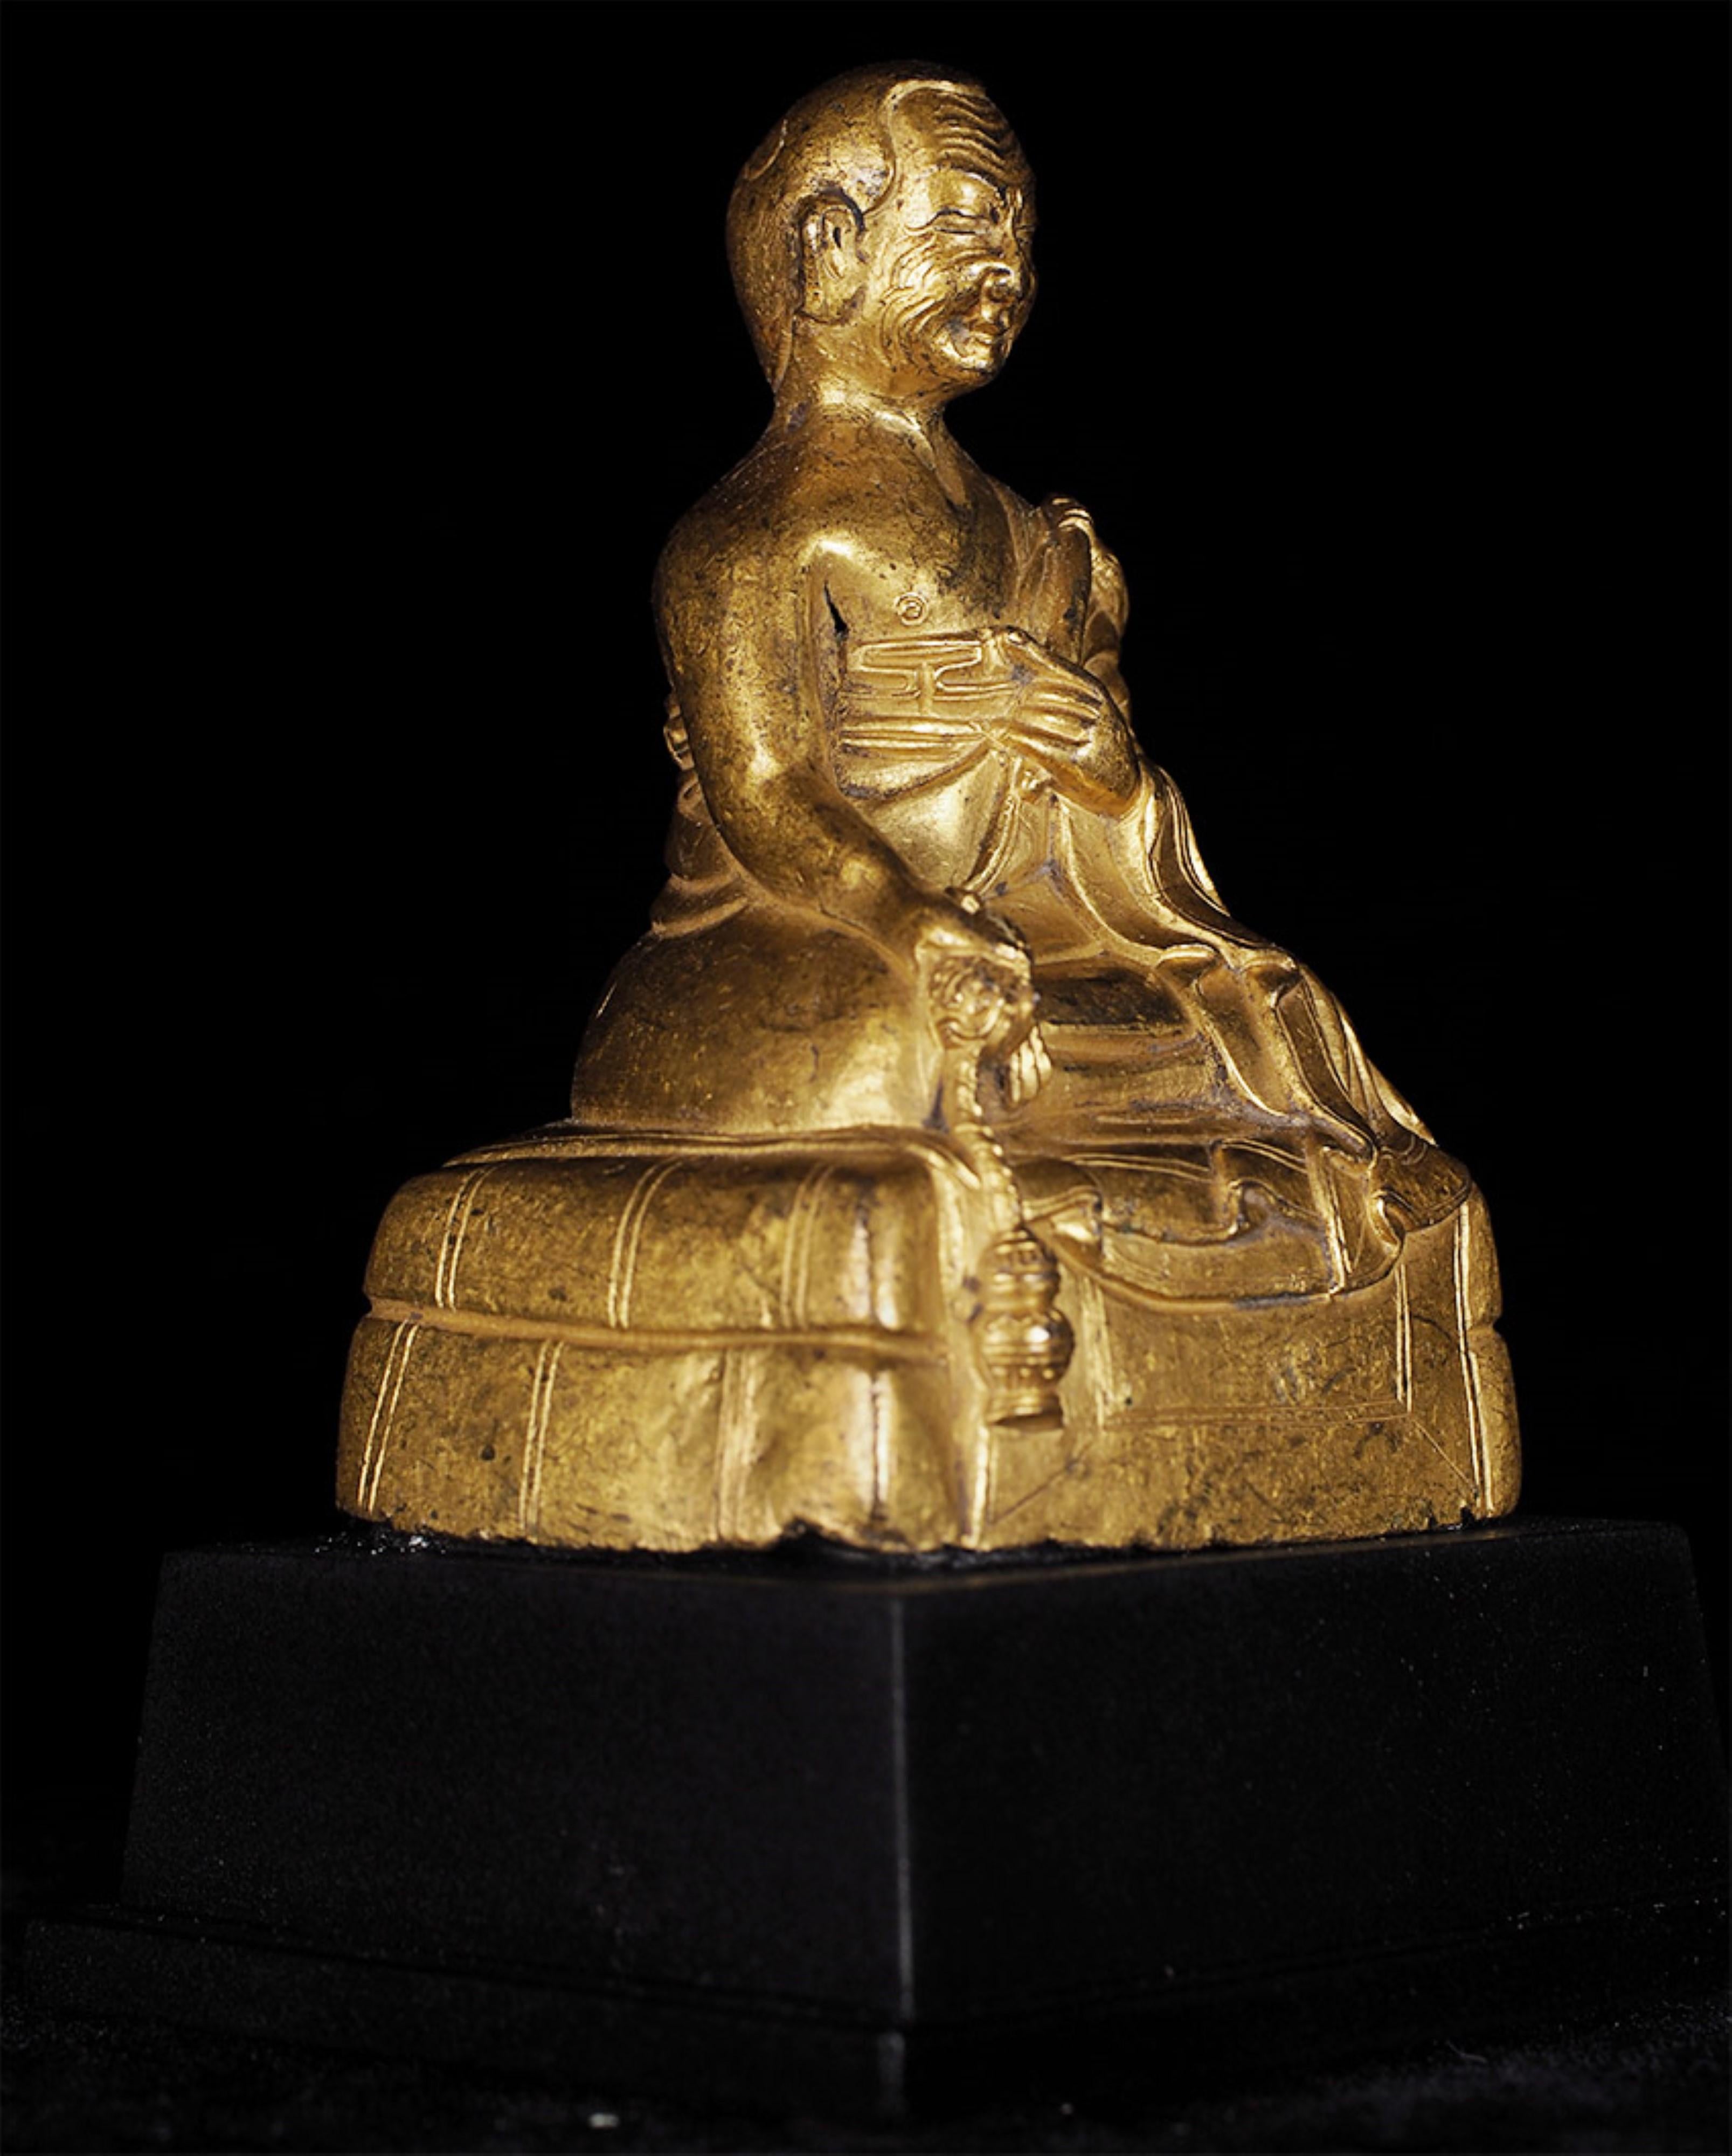 Remarkable 17thC or earlier Tibetan Buddhist Portrait Statue of a Monk in copper. Some damage to the back of the base in the spot where a hand would naturally apply pressure when holding it or picking it up.  He also  sits a little unevenly on the